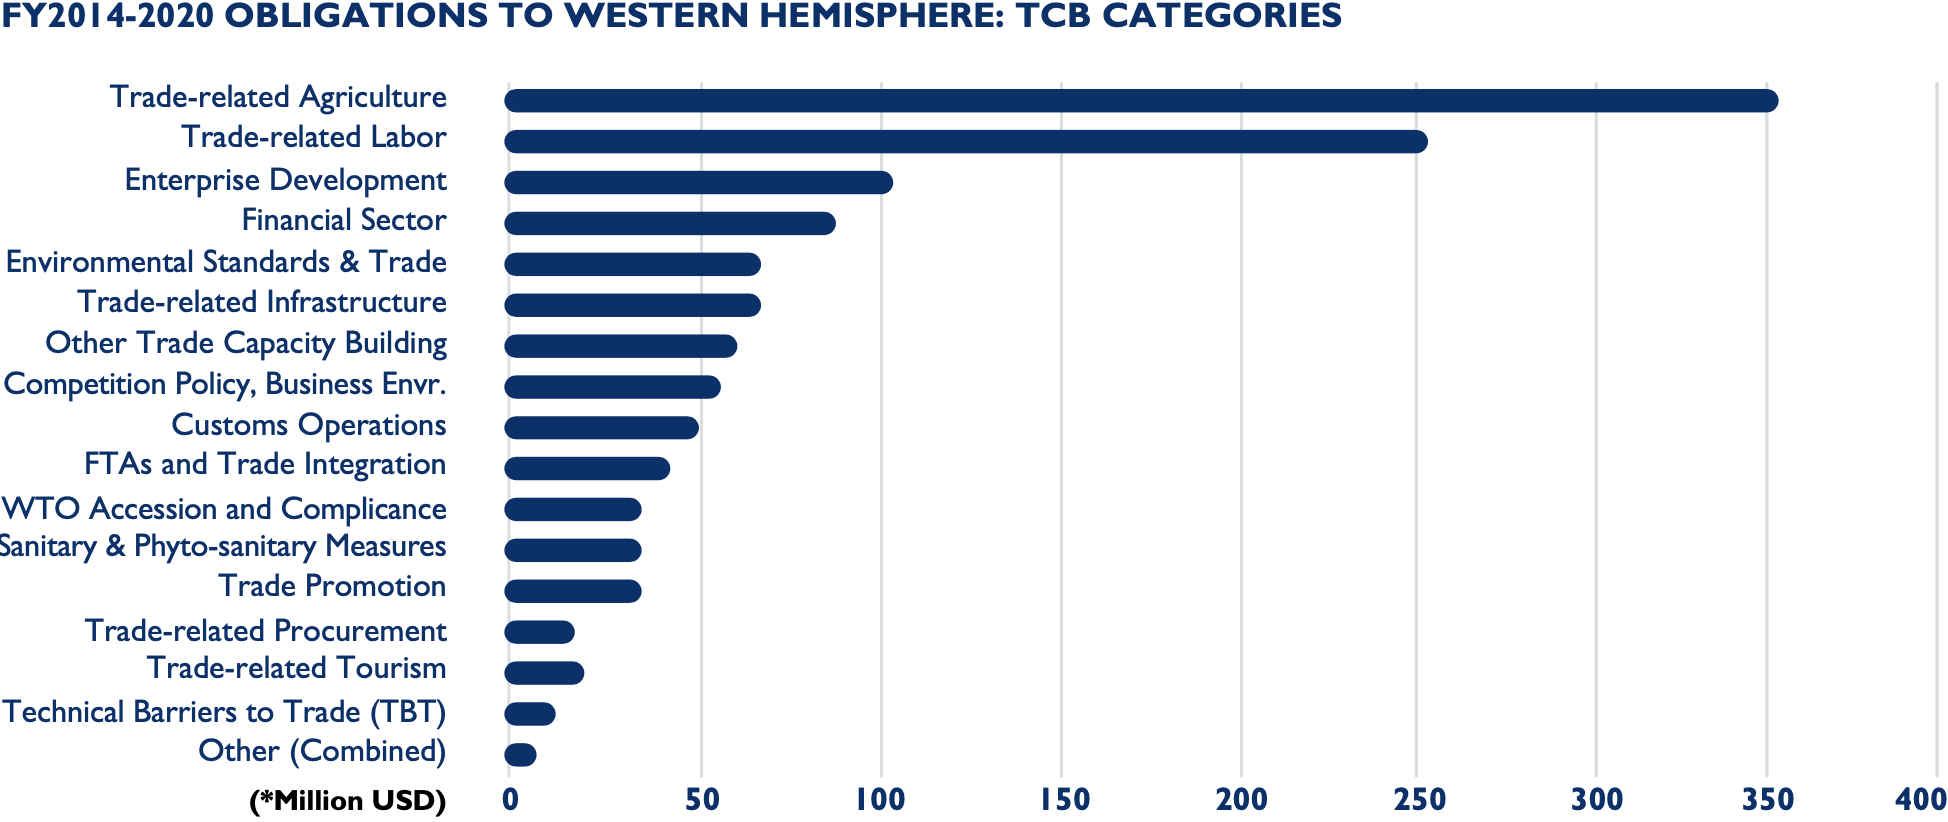 Bar chart of oglibations by category to the Western Hemisphere FY2014-2020